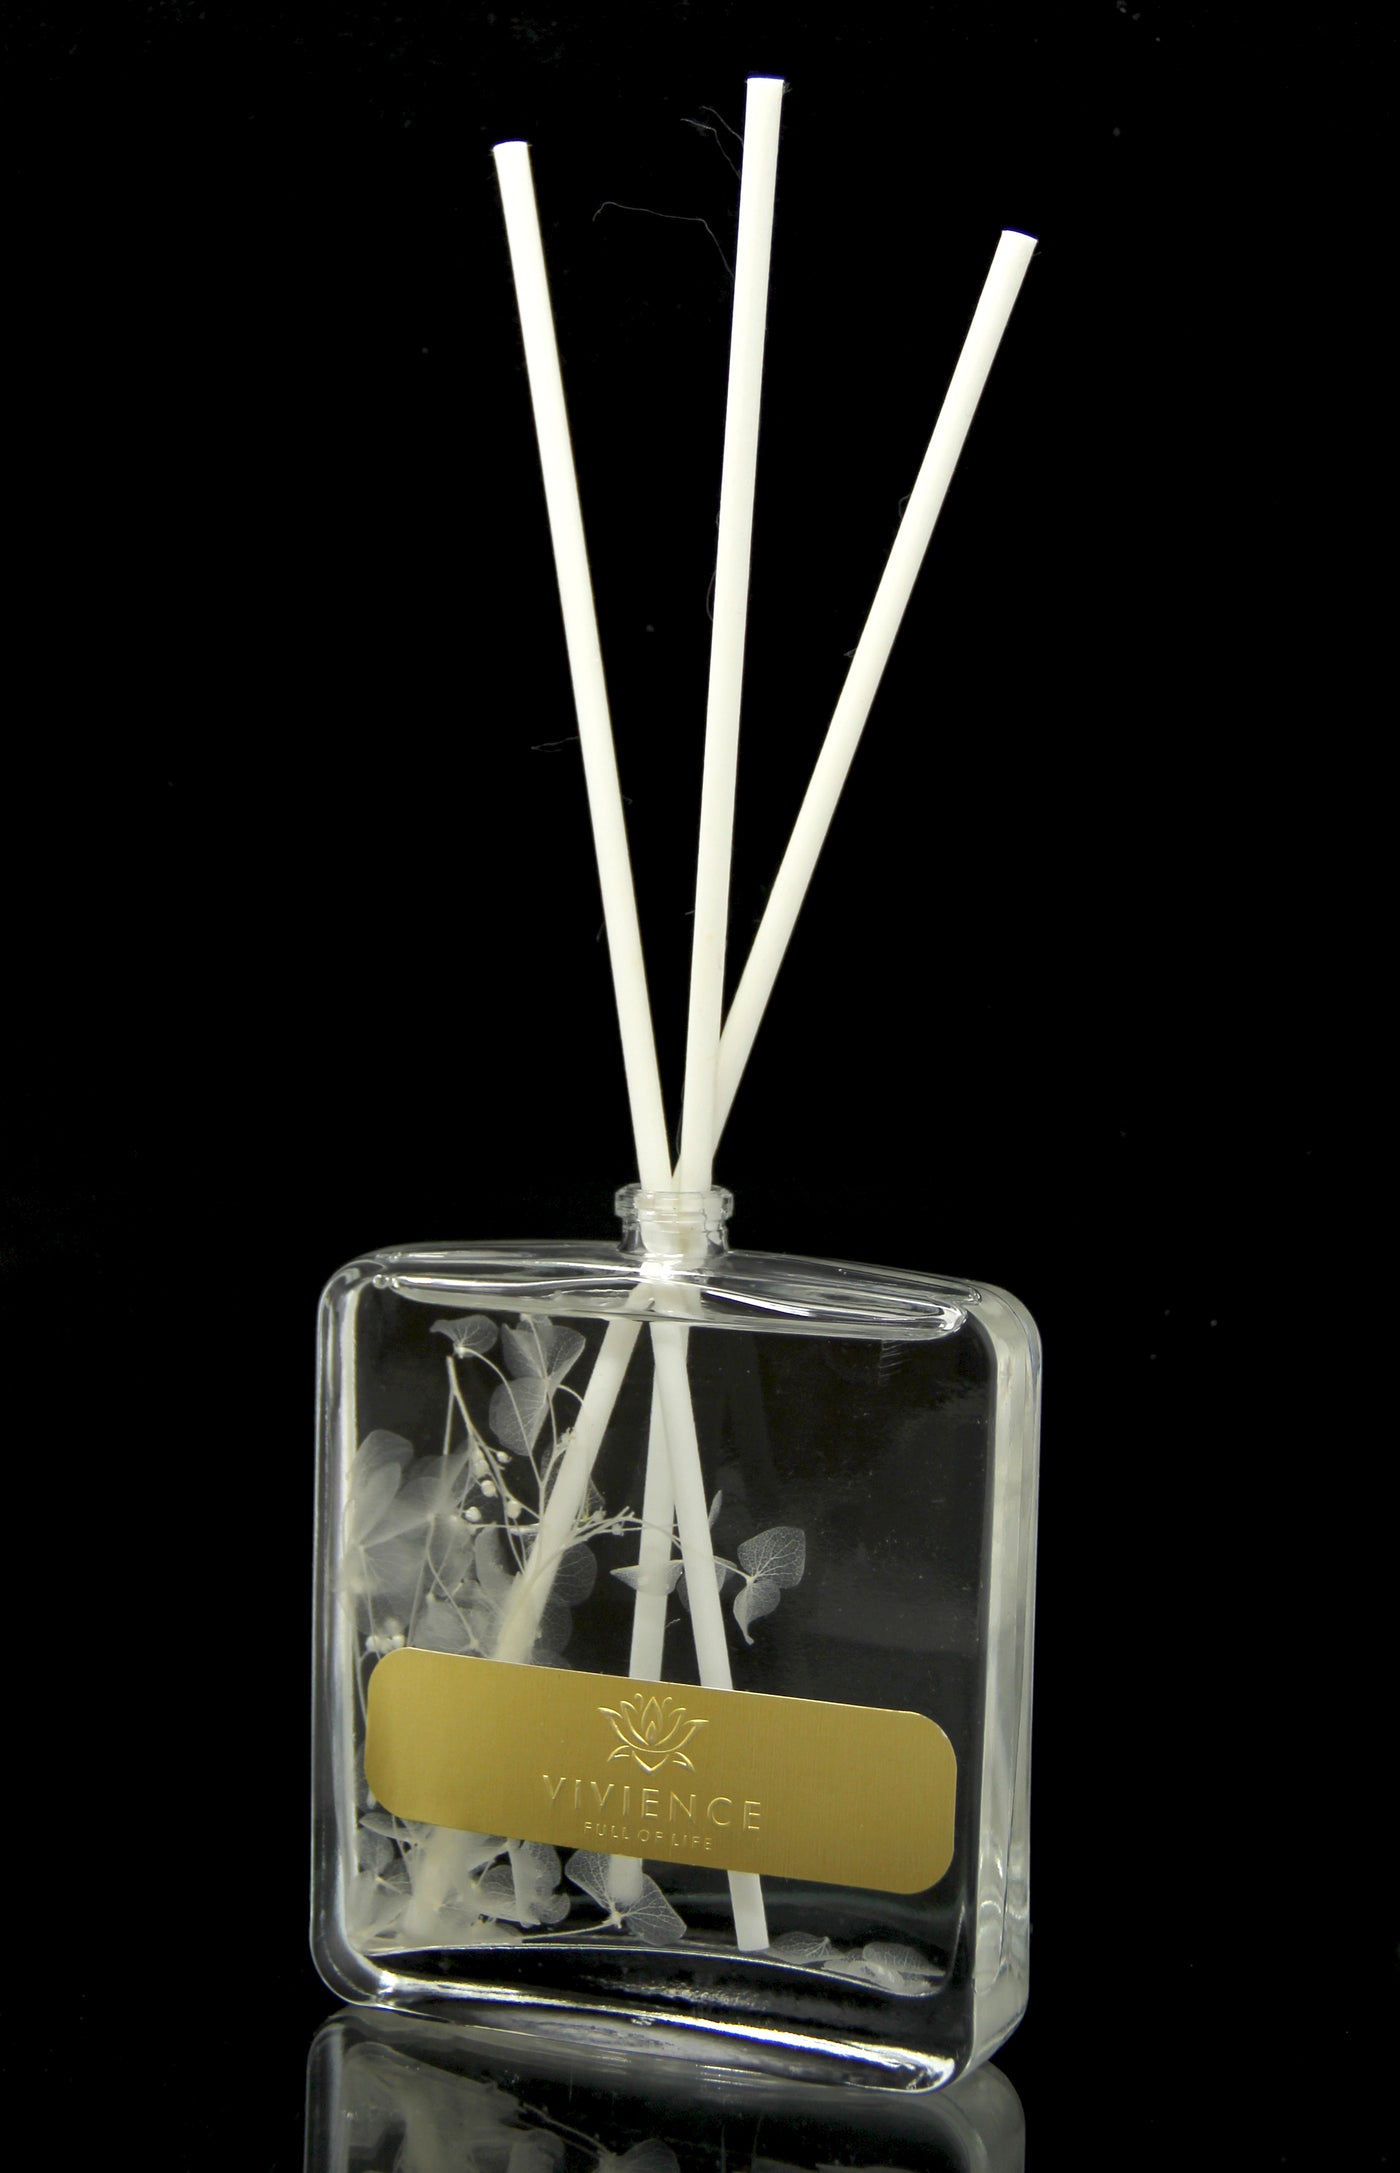 Clear Bottle Reed Diffuser with White Flower and White Reeds, "Cold Water" Scent